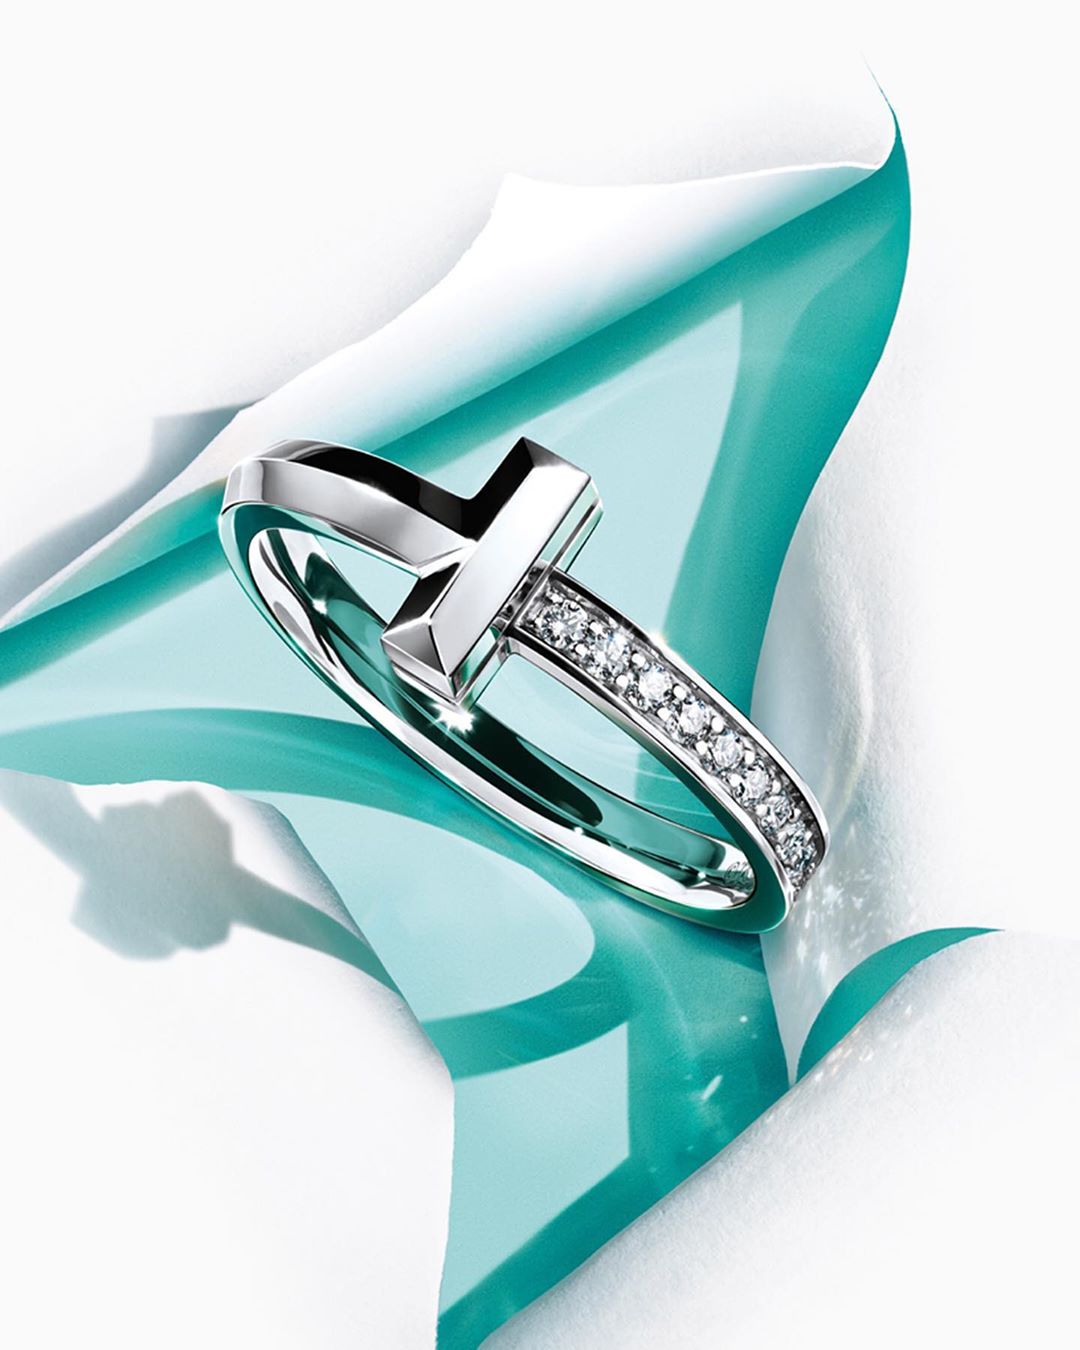 Tiffany & Co. - No introductions necessary. The Tiffany T1 collection, now in 18k white gold, showcases Tiffany’s long-standing tradition of unmatched technique and artistry. Tap for T and discover mo...